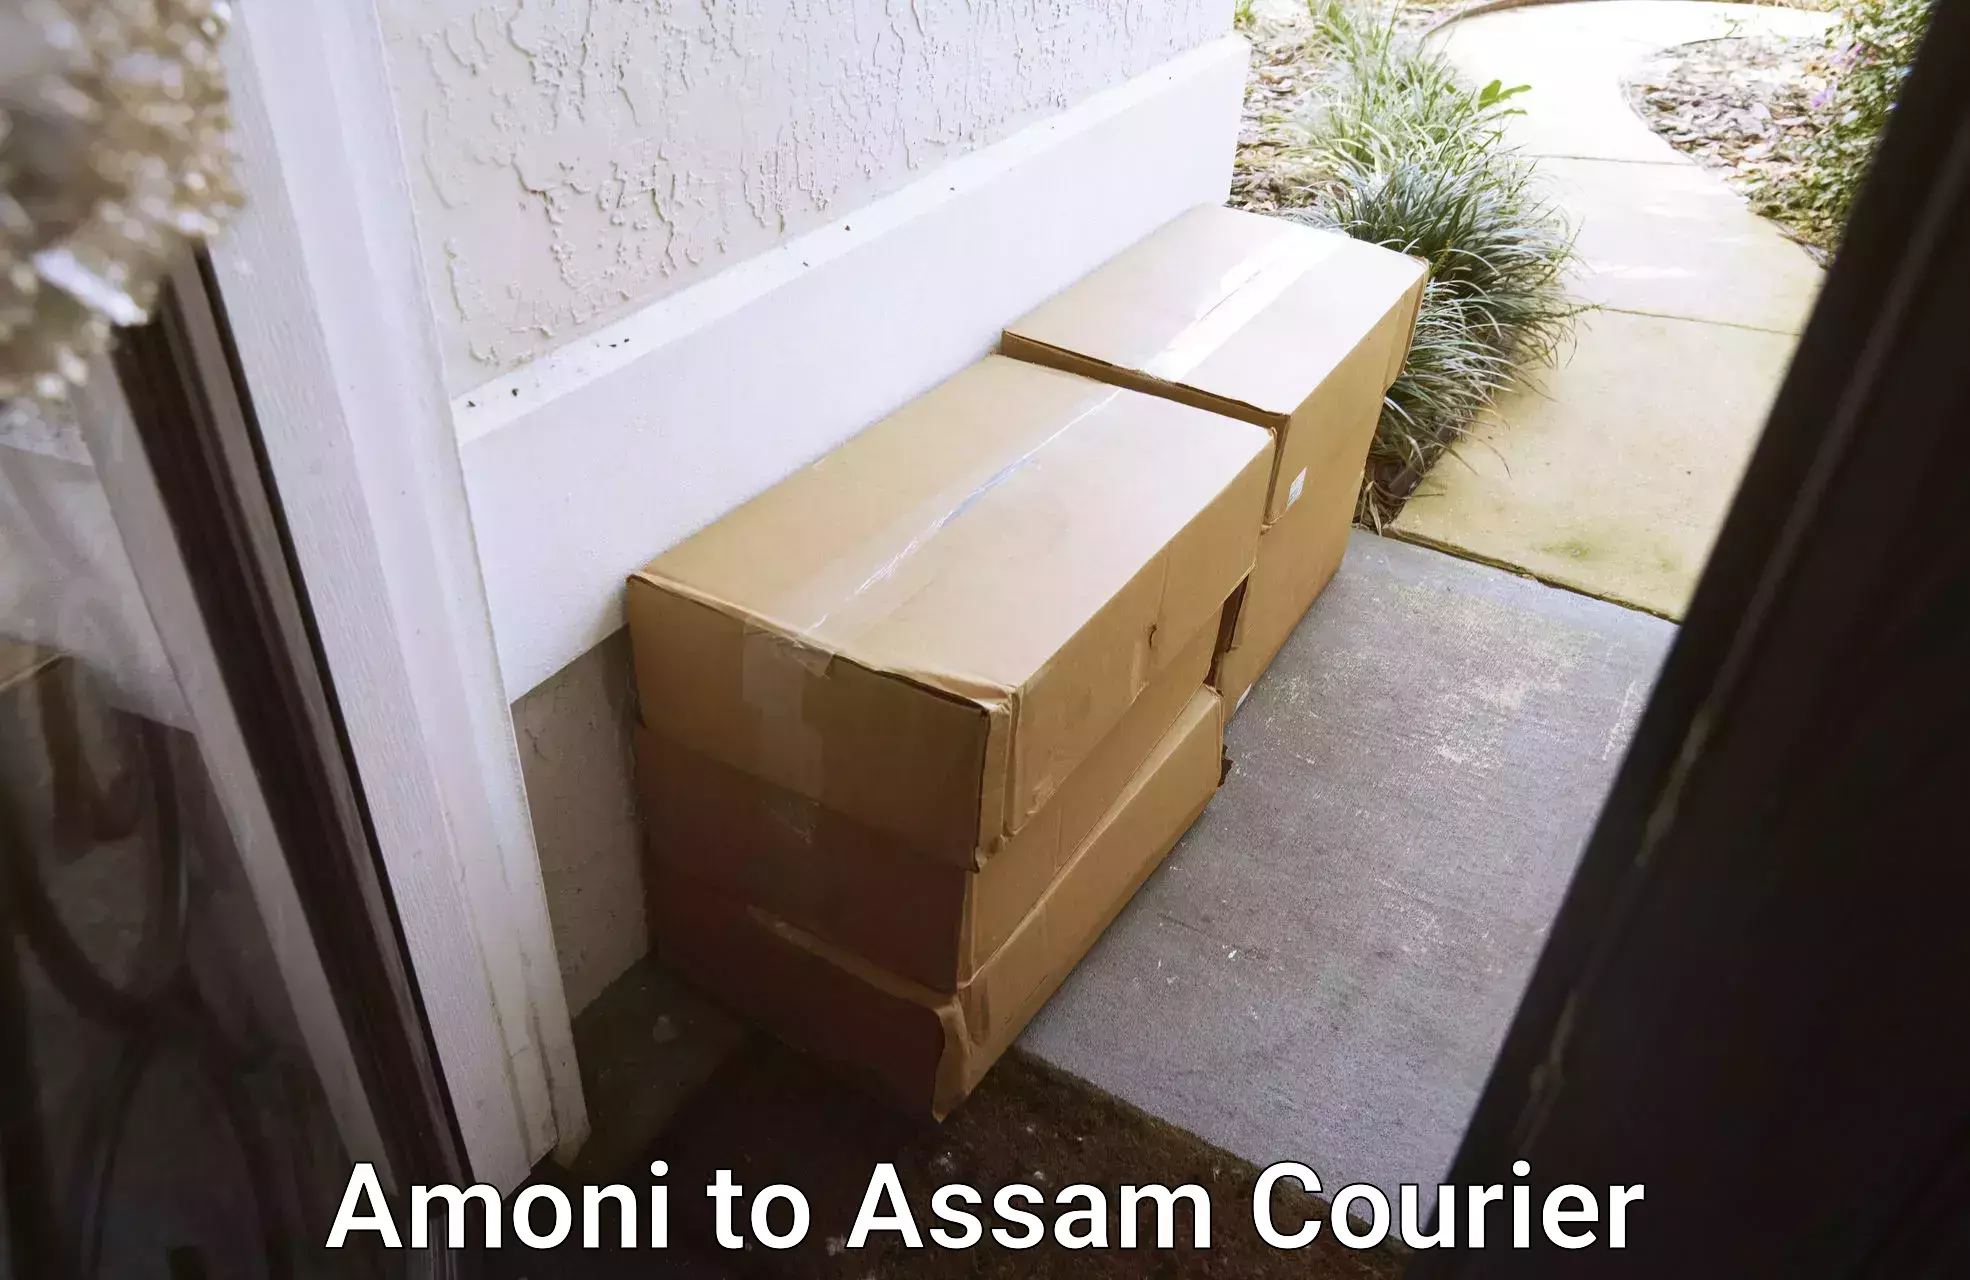 Full-service courier options Amoni to Assam